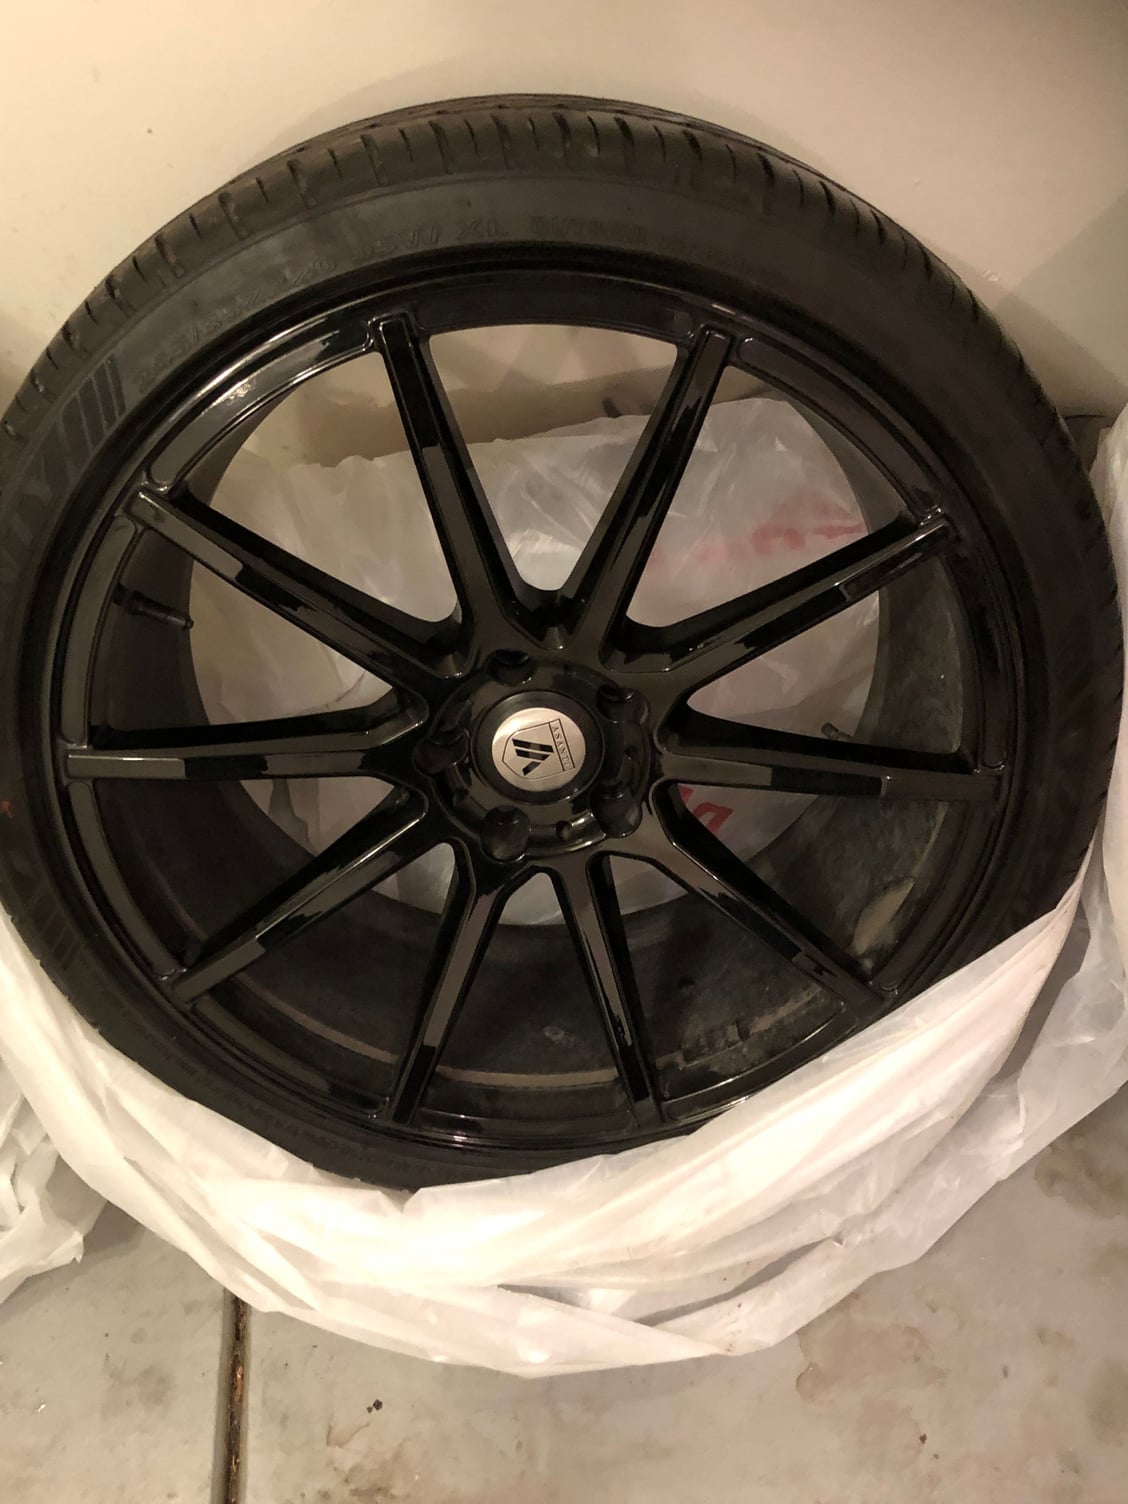 Wheels and Tires/Axles - FS: Asanti ABL-20's in gloss black - Used - 2015 to 2019 Acura TLX - St Charles, IL 60175, United States